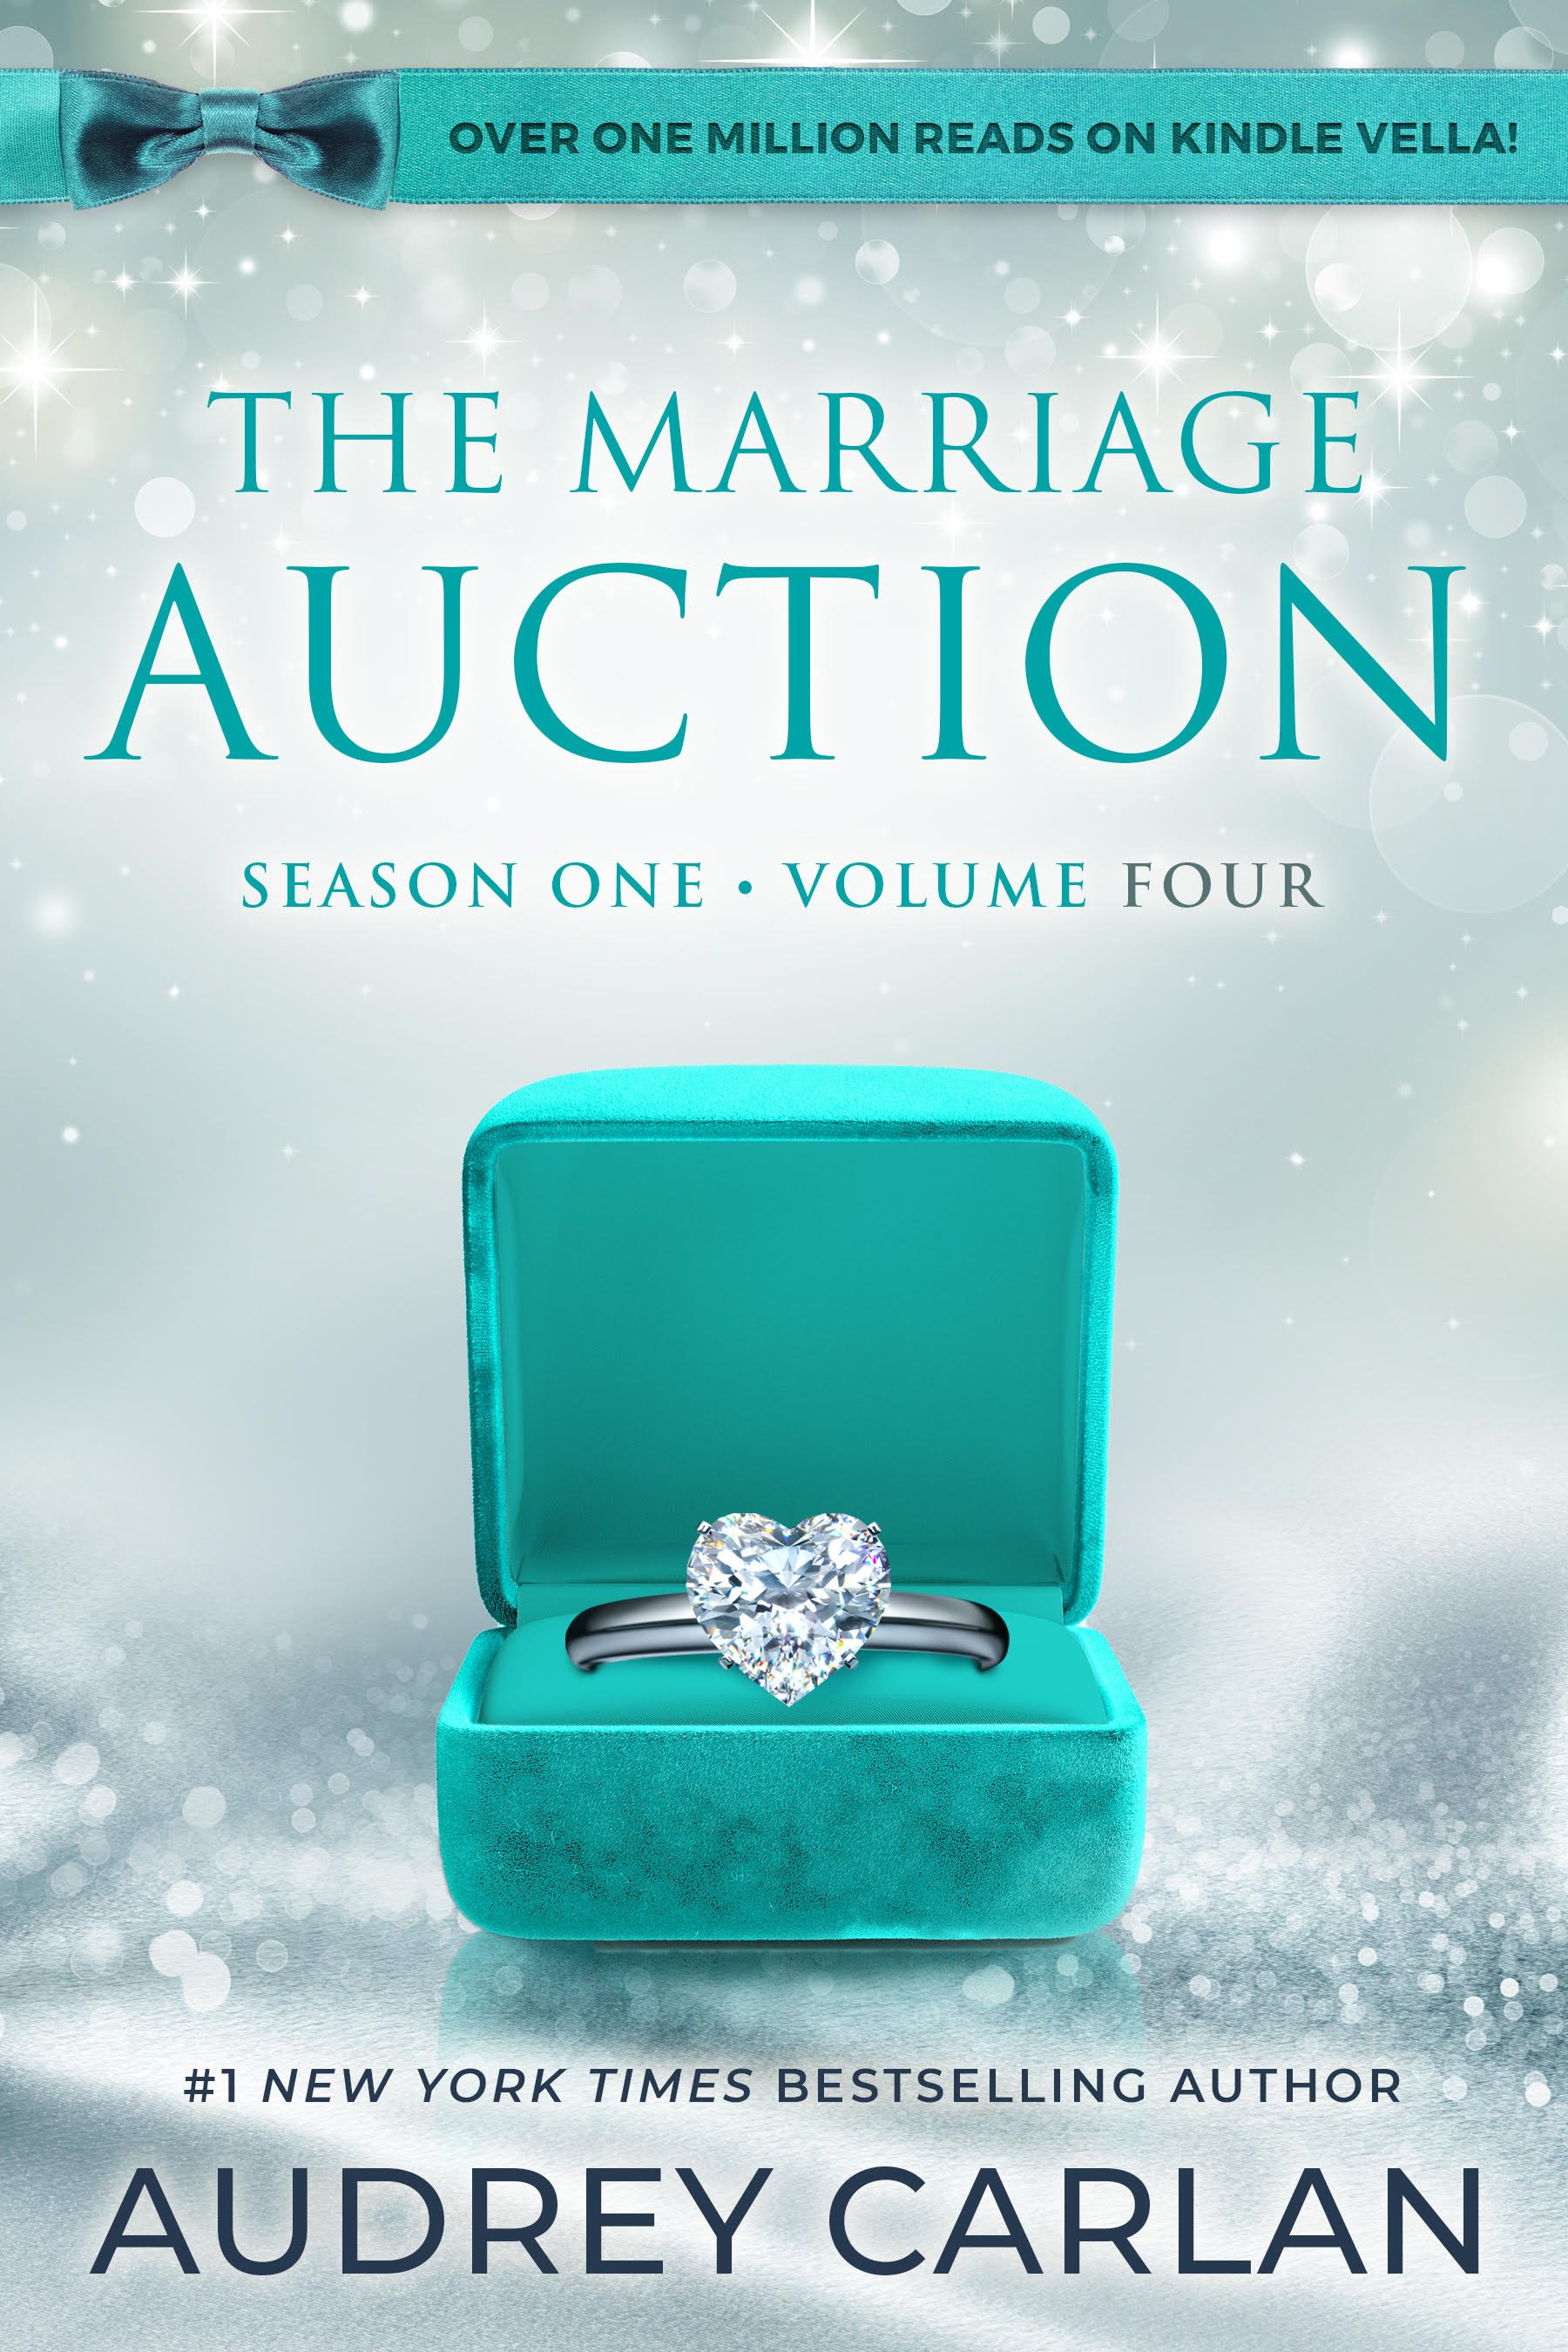 The Marriage Auction_book 4_300dpi.jpg